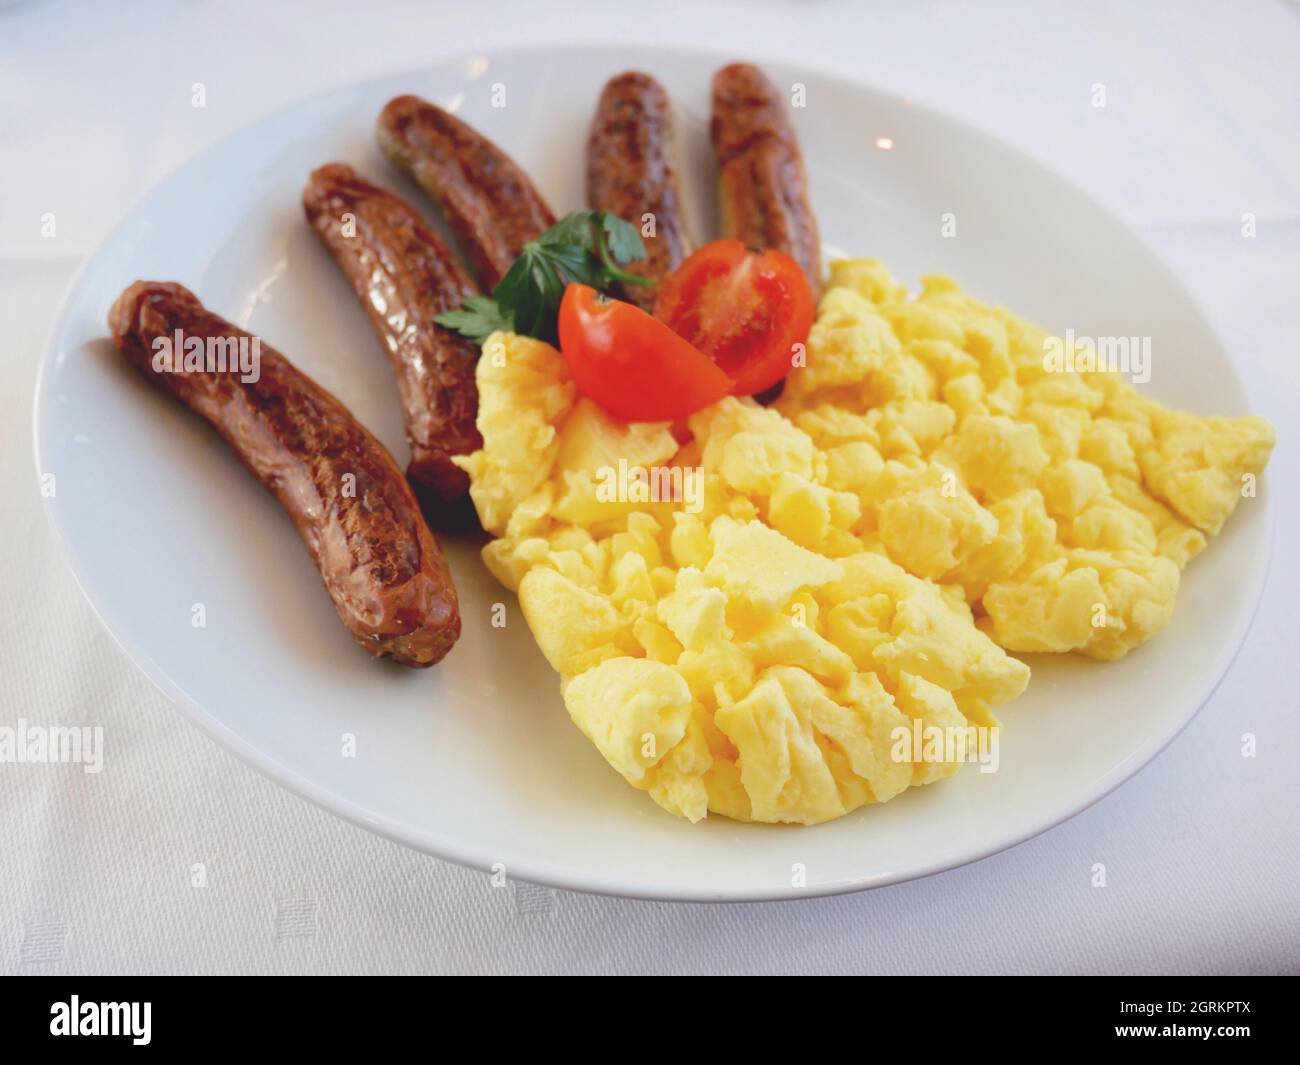 Close-up Of Breakfast Served On Table Stock Photo